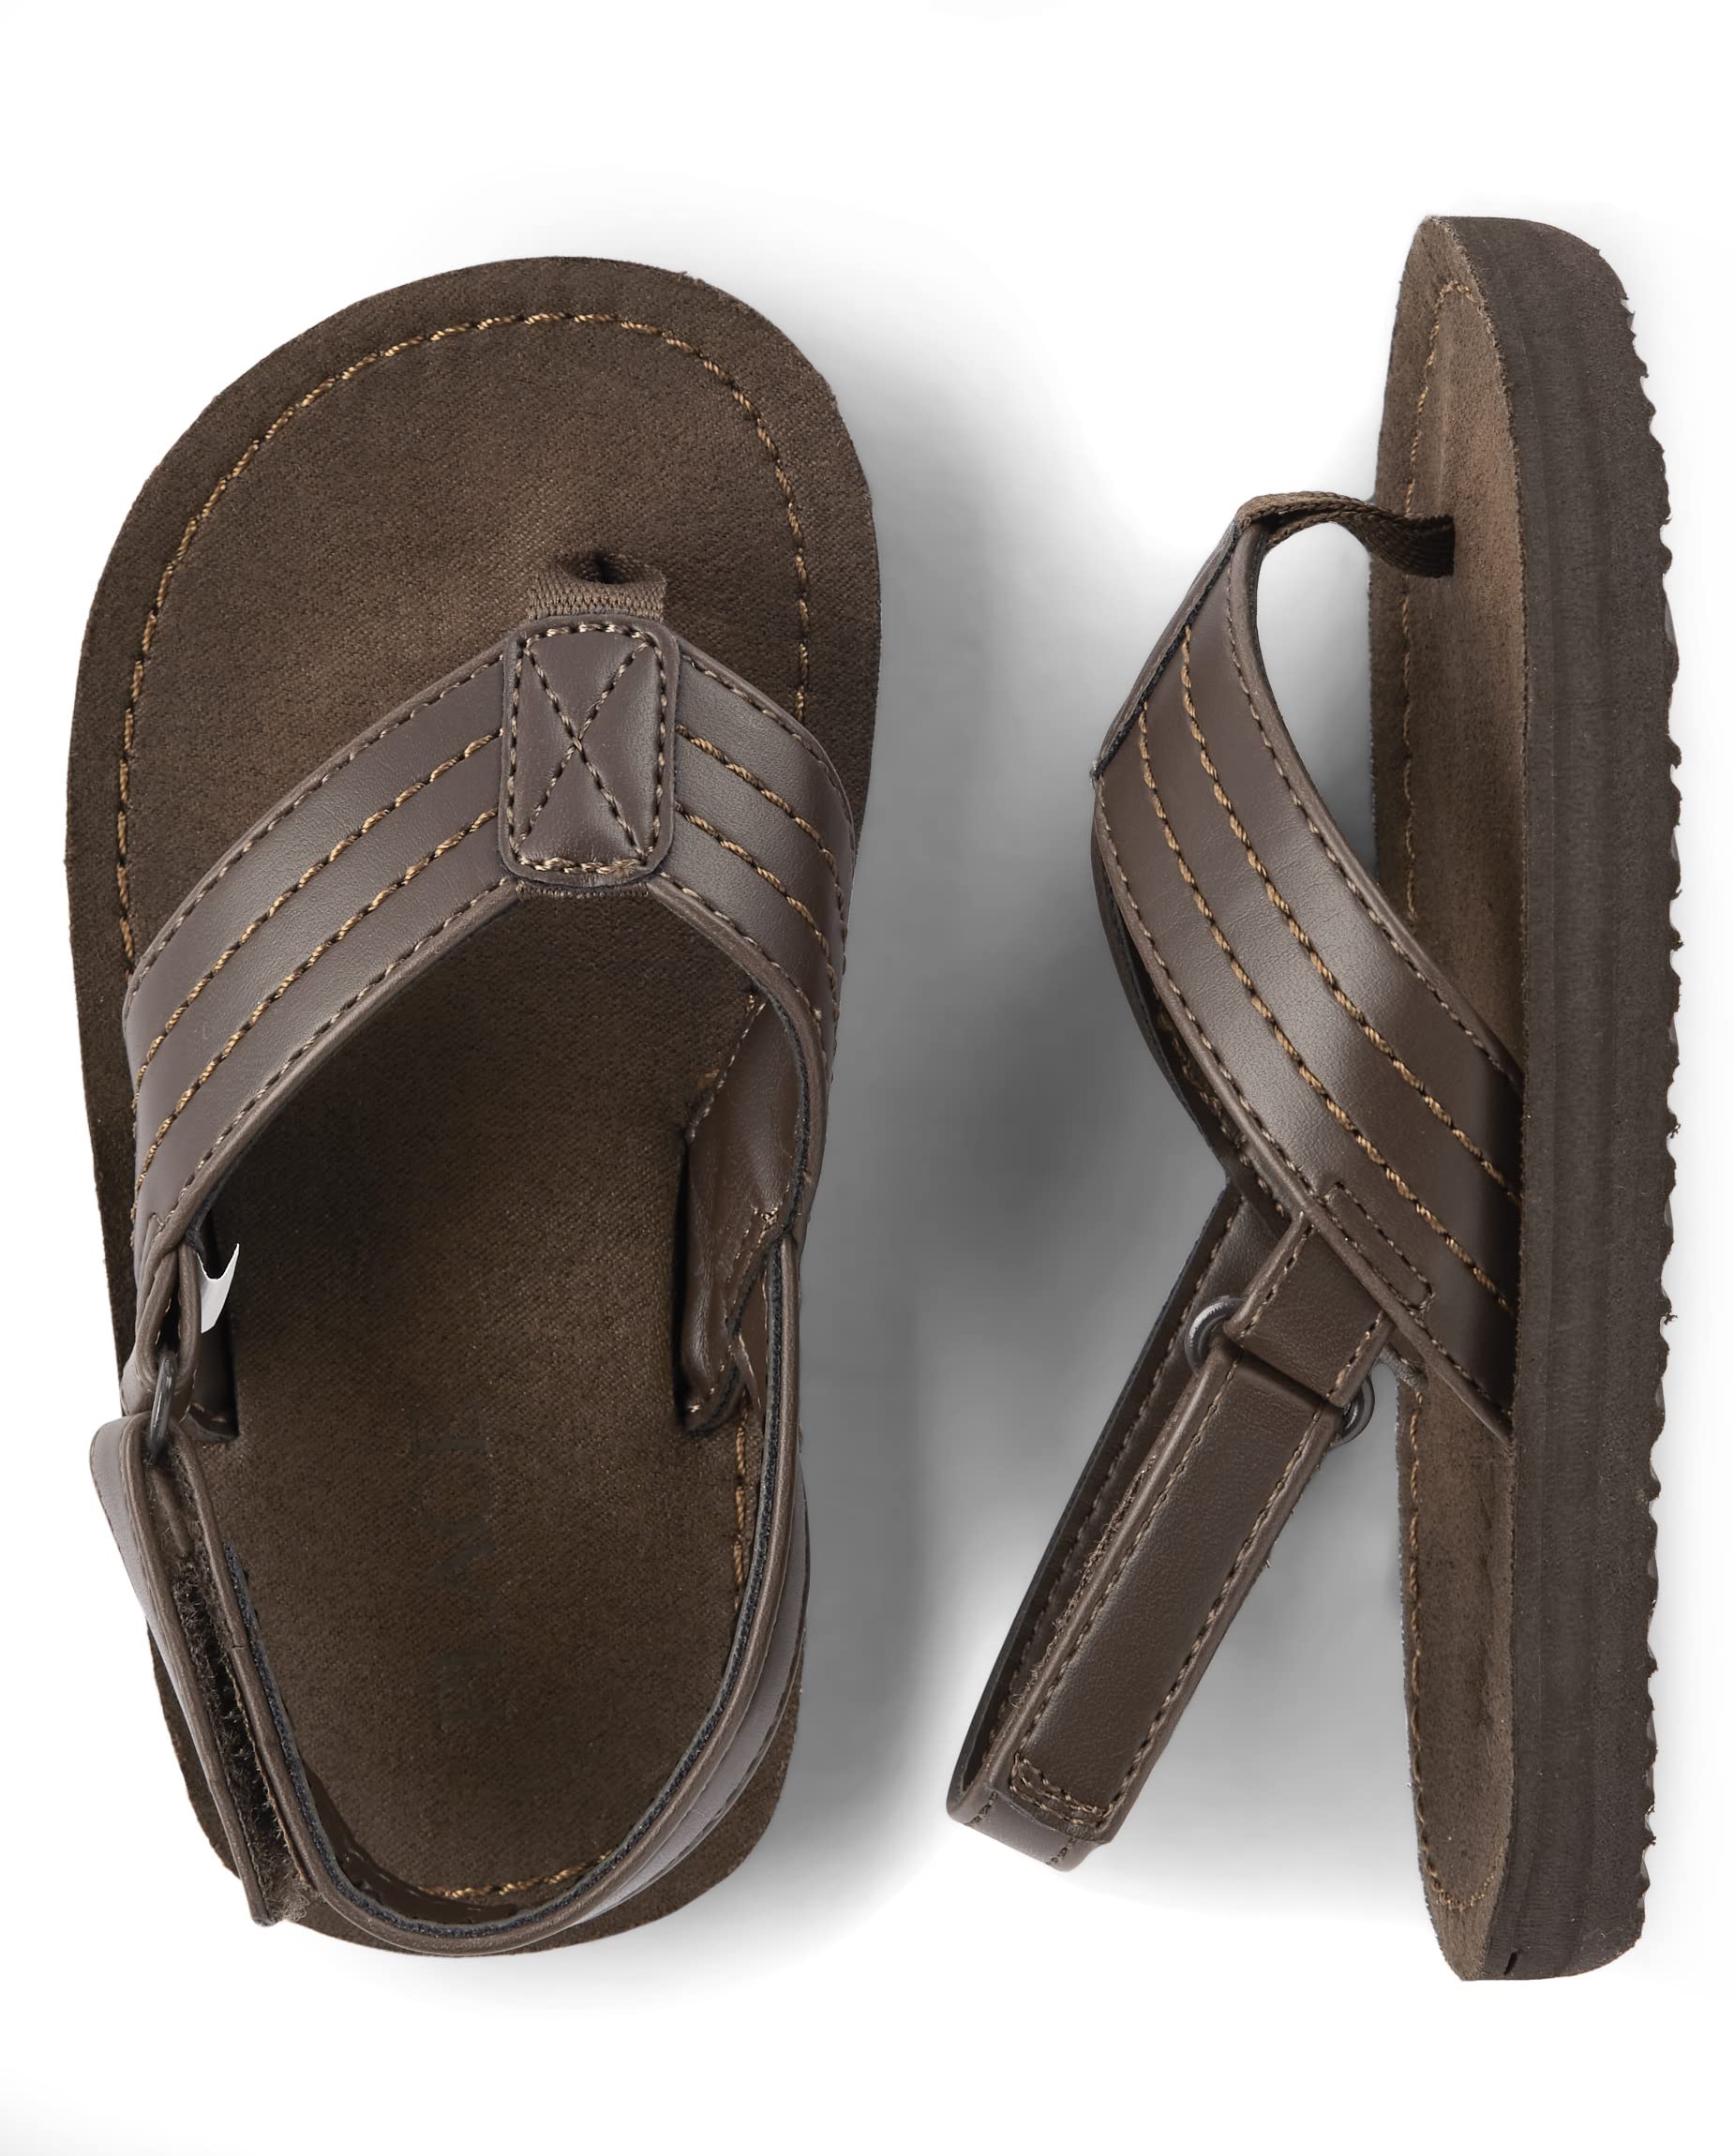 The Children's Place Unisex-Child and Toddler Boys Flip Flops with Backstrap